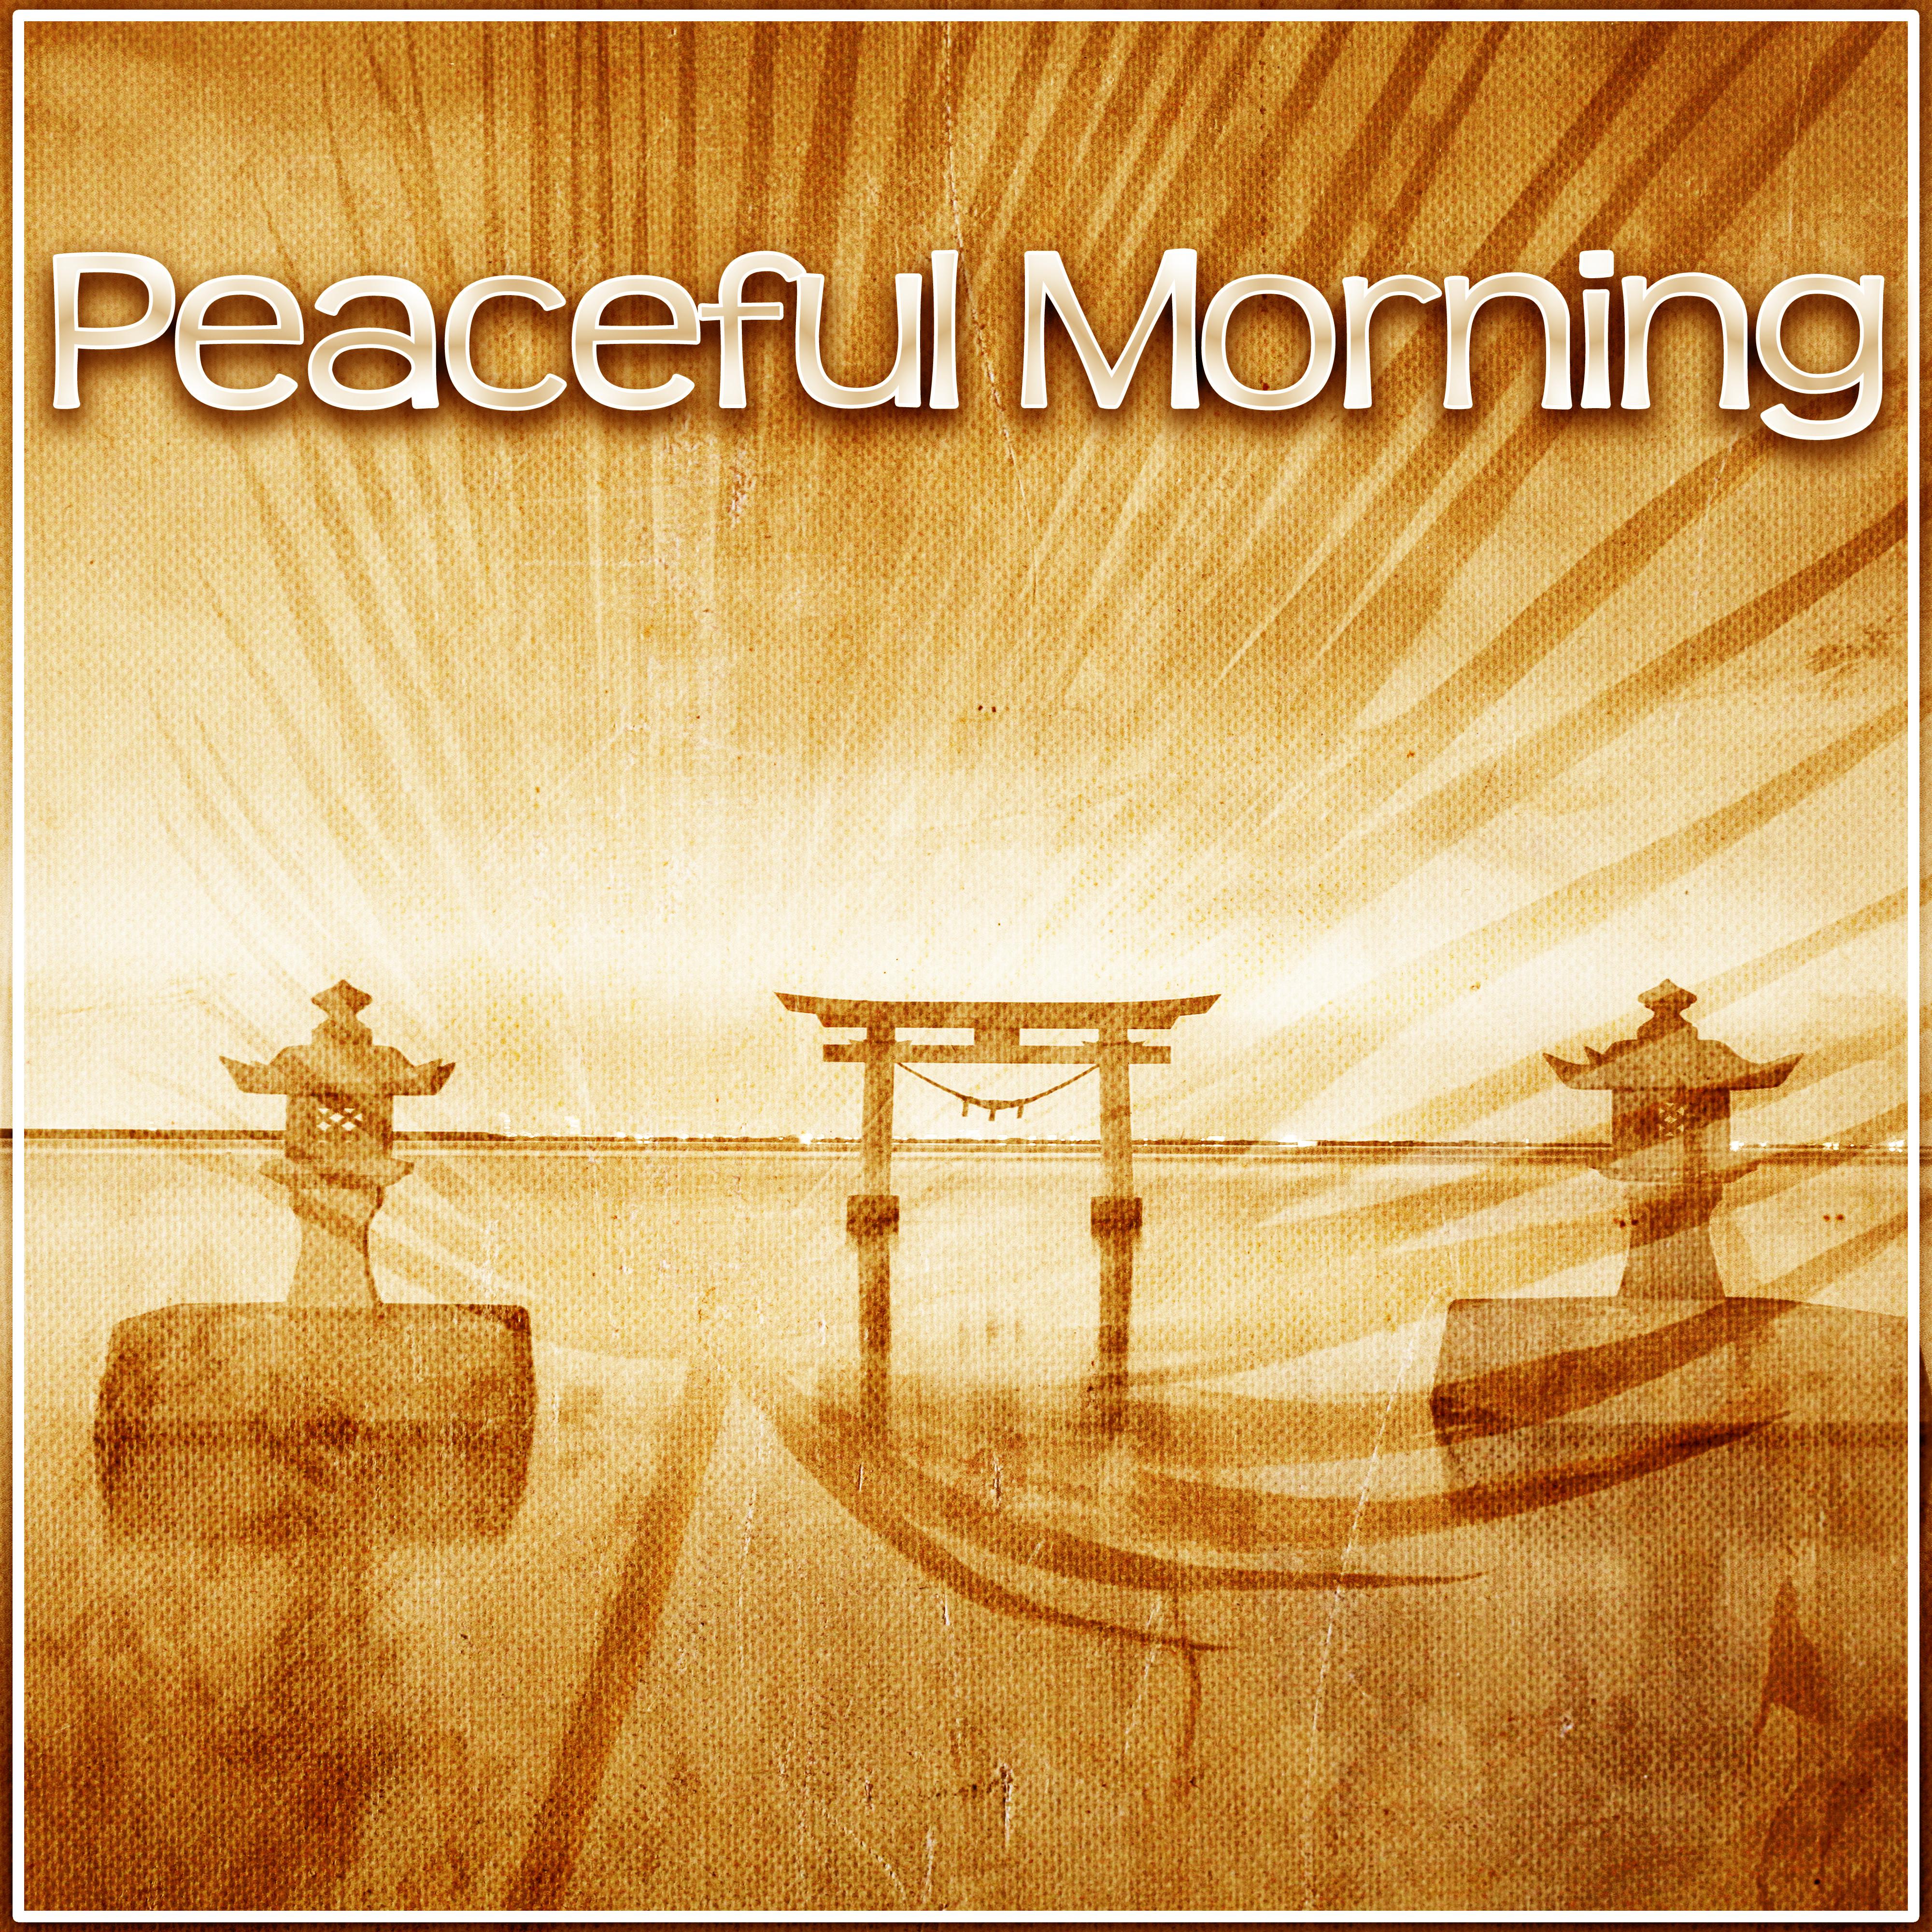 Peaceful Morning - Calmness Sounds of Nature to Start Day with Good Mood, Relax, Meditation, Massage, Healing Music with Nature Sounds, Sleep, Yoga